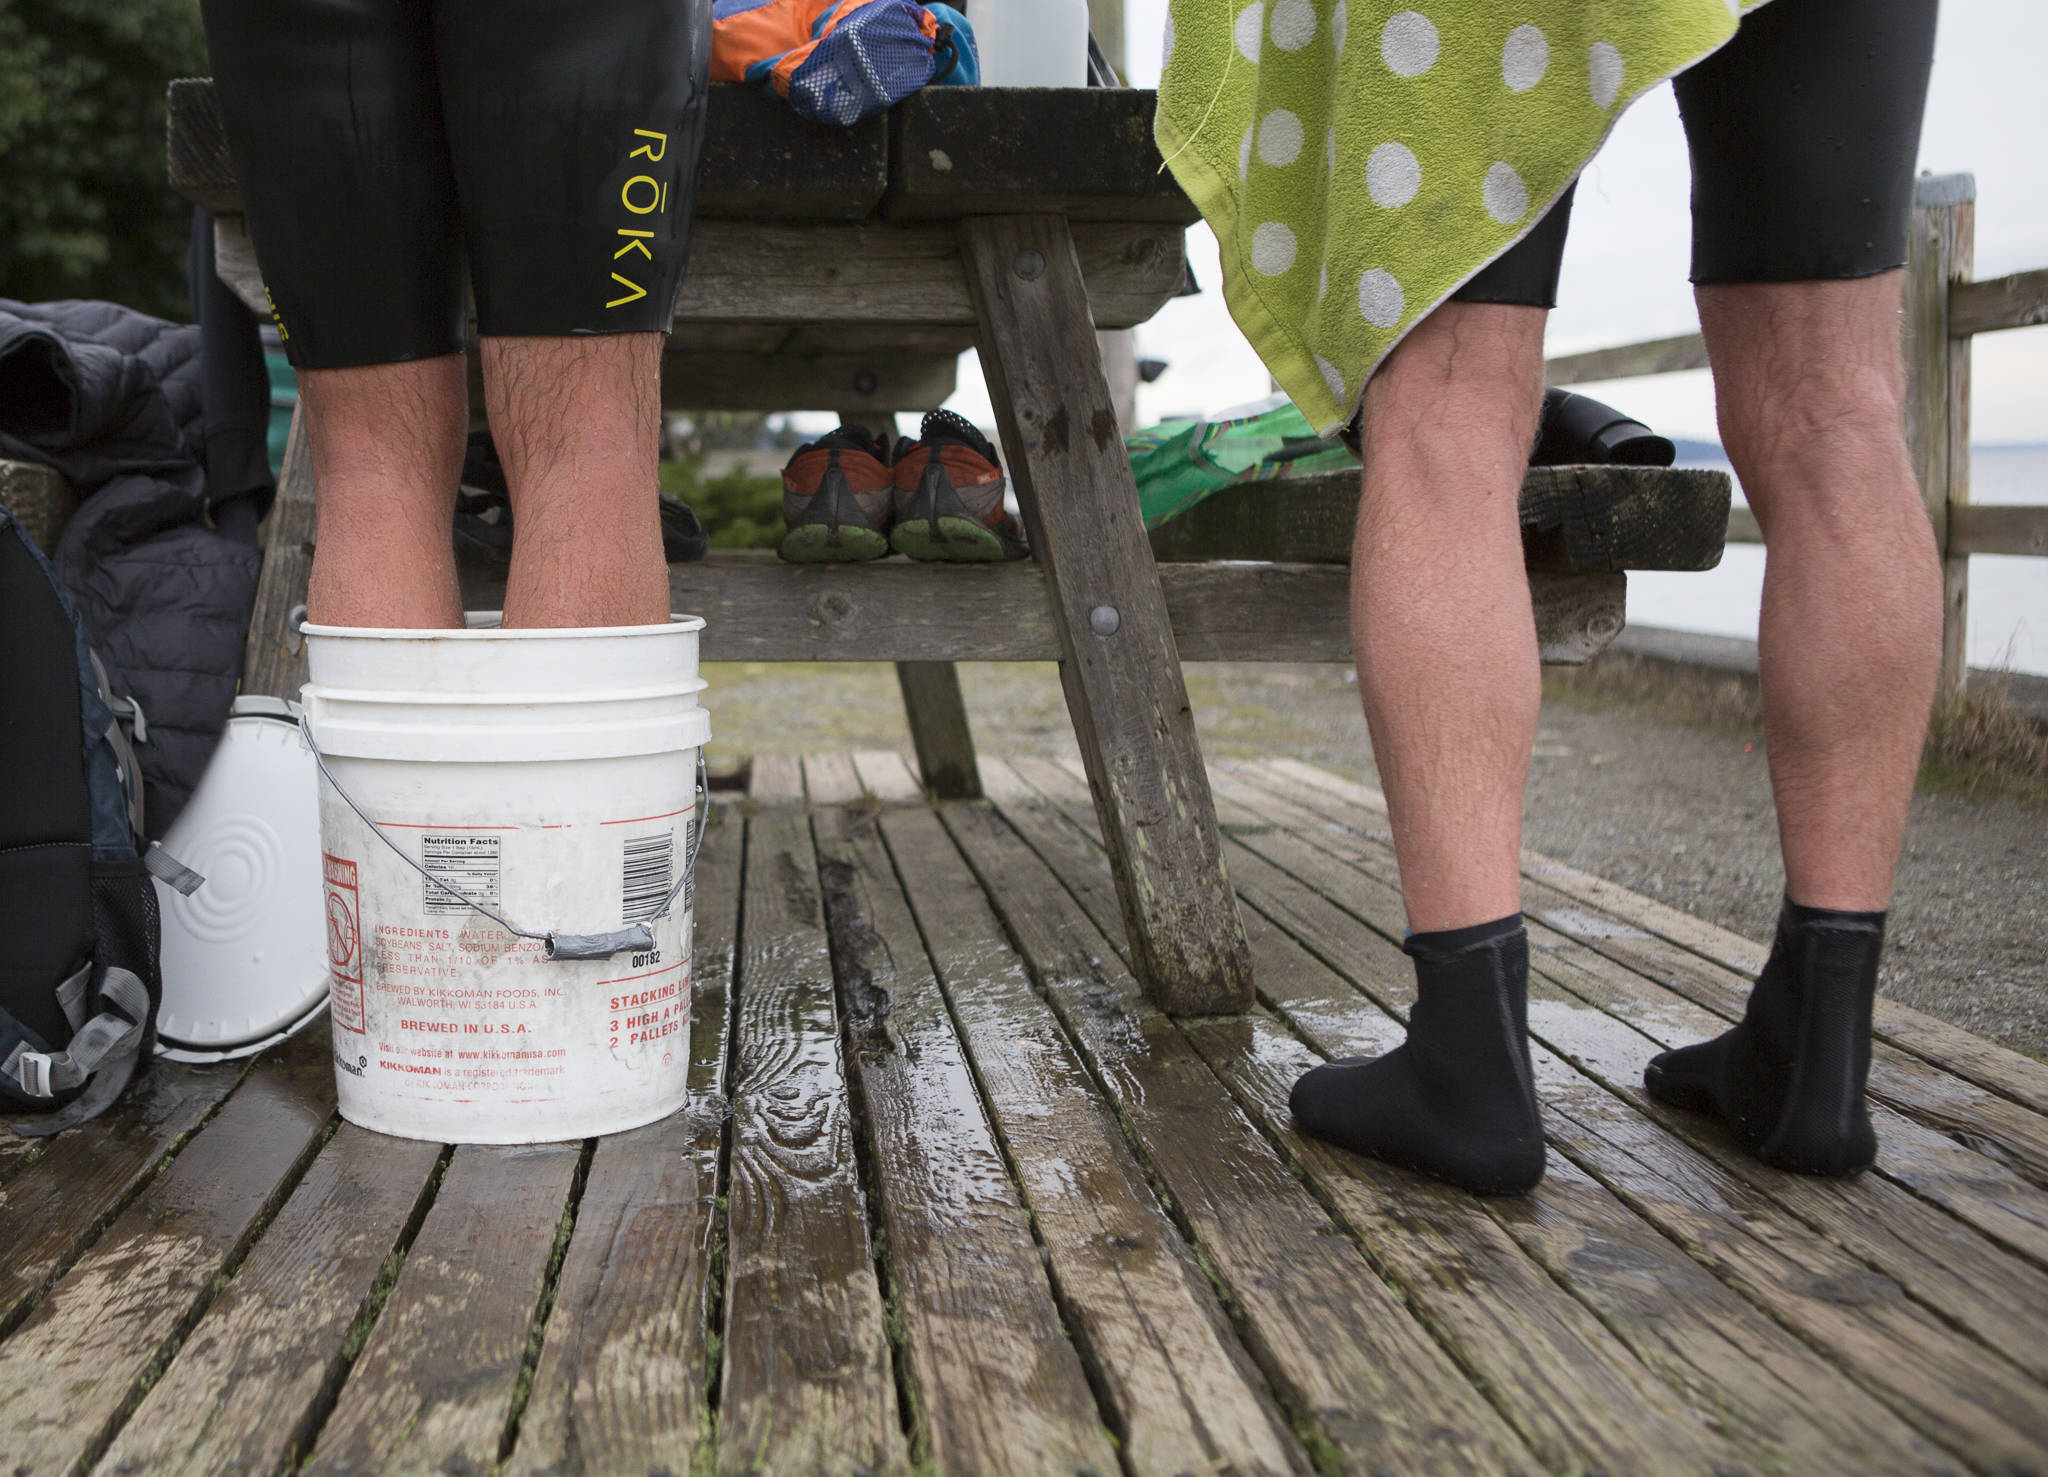 Joe Hempel (left) stands in a bucket of hot water to warm up as Brian McCleary dries off. (Olivia Vanni / The Herald)